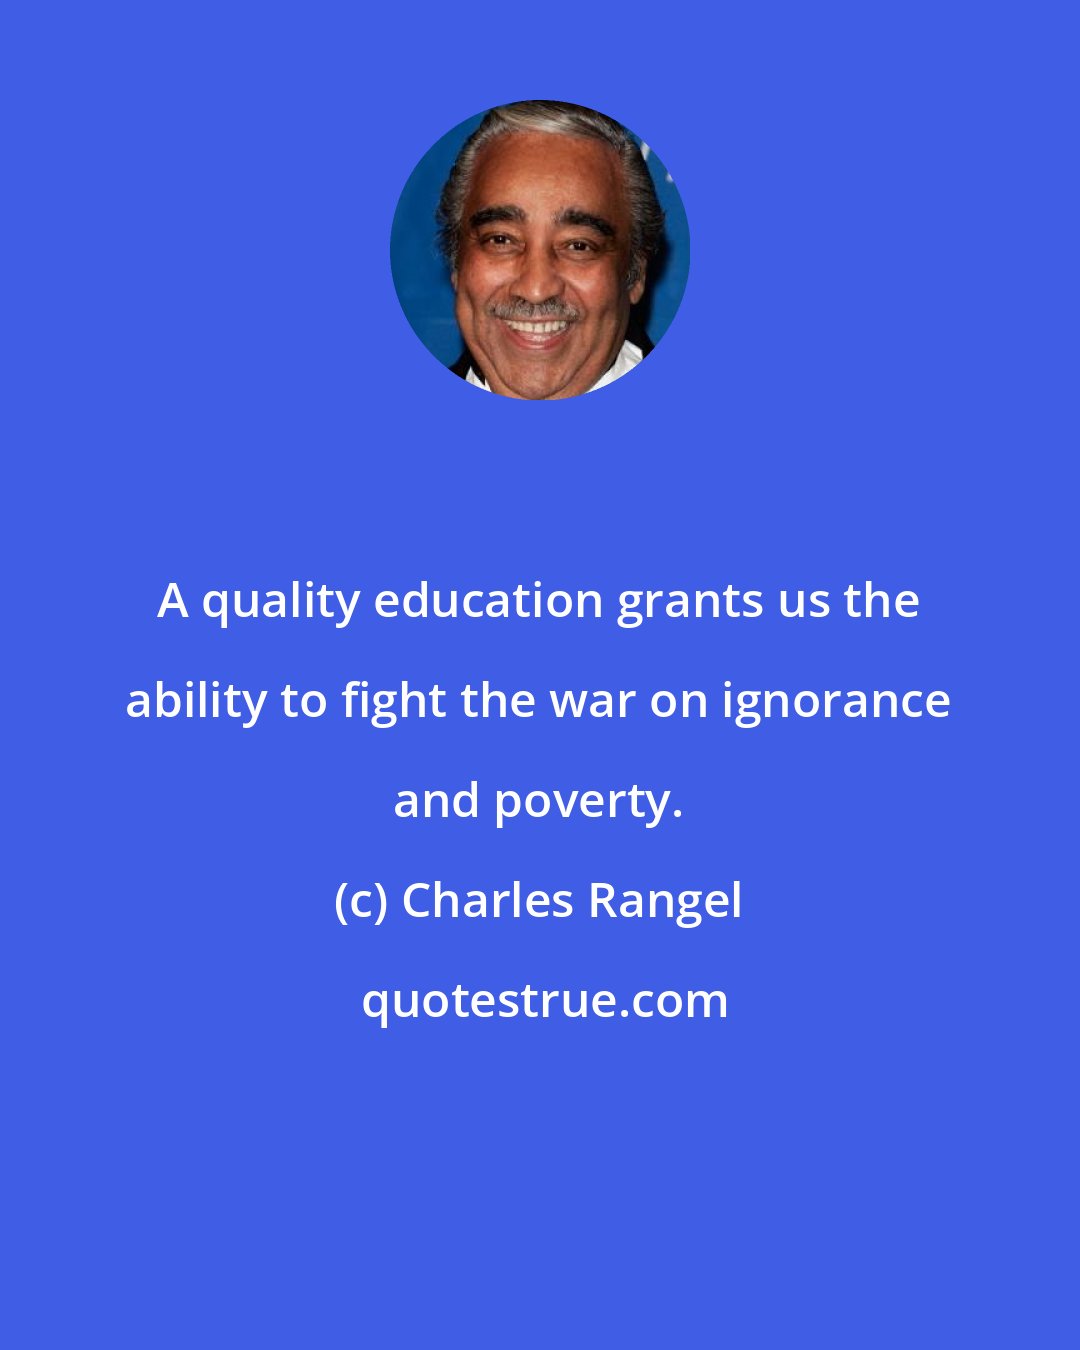 Charles Rangel: A quality education grants us the ability to fight the war on ignorance and poverty.